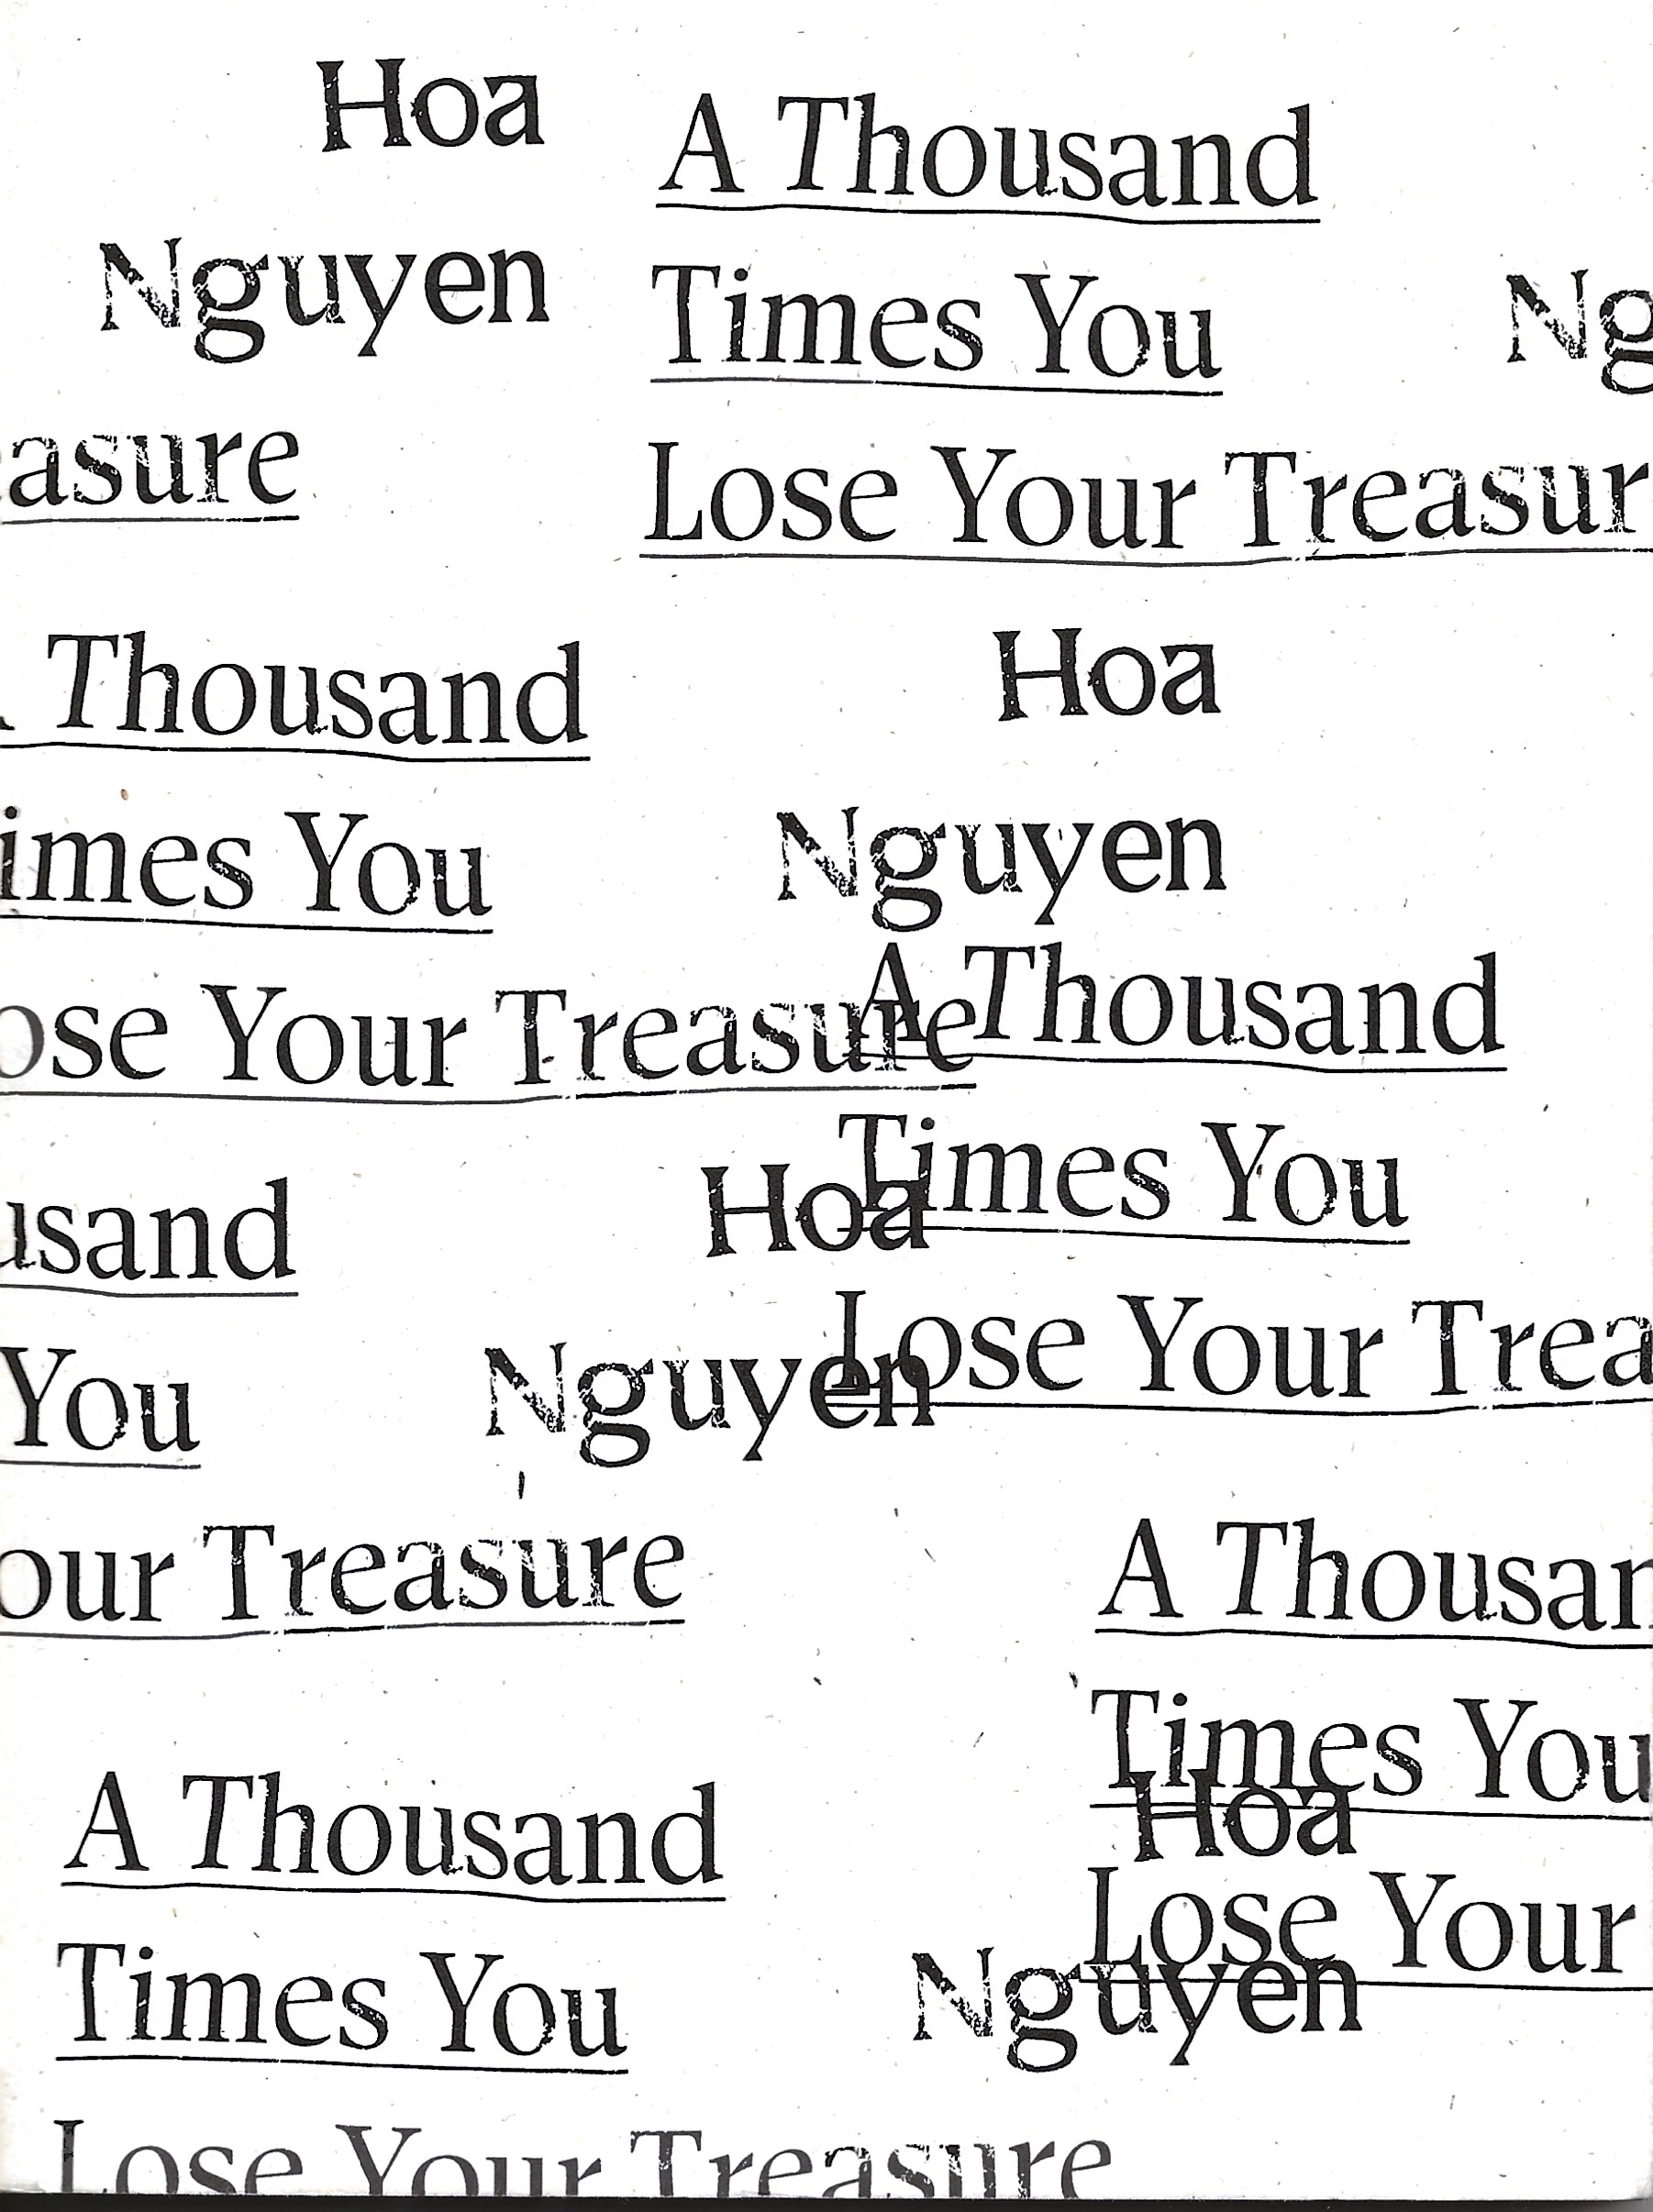 Hoa Nguyen Interview (A Thousand Times You Lose Your Treasure)